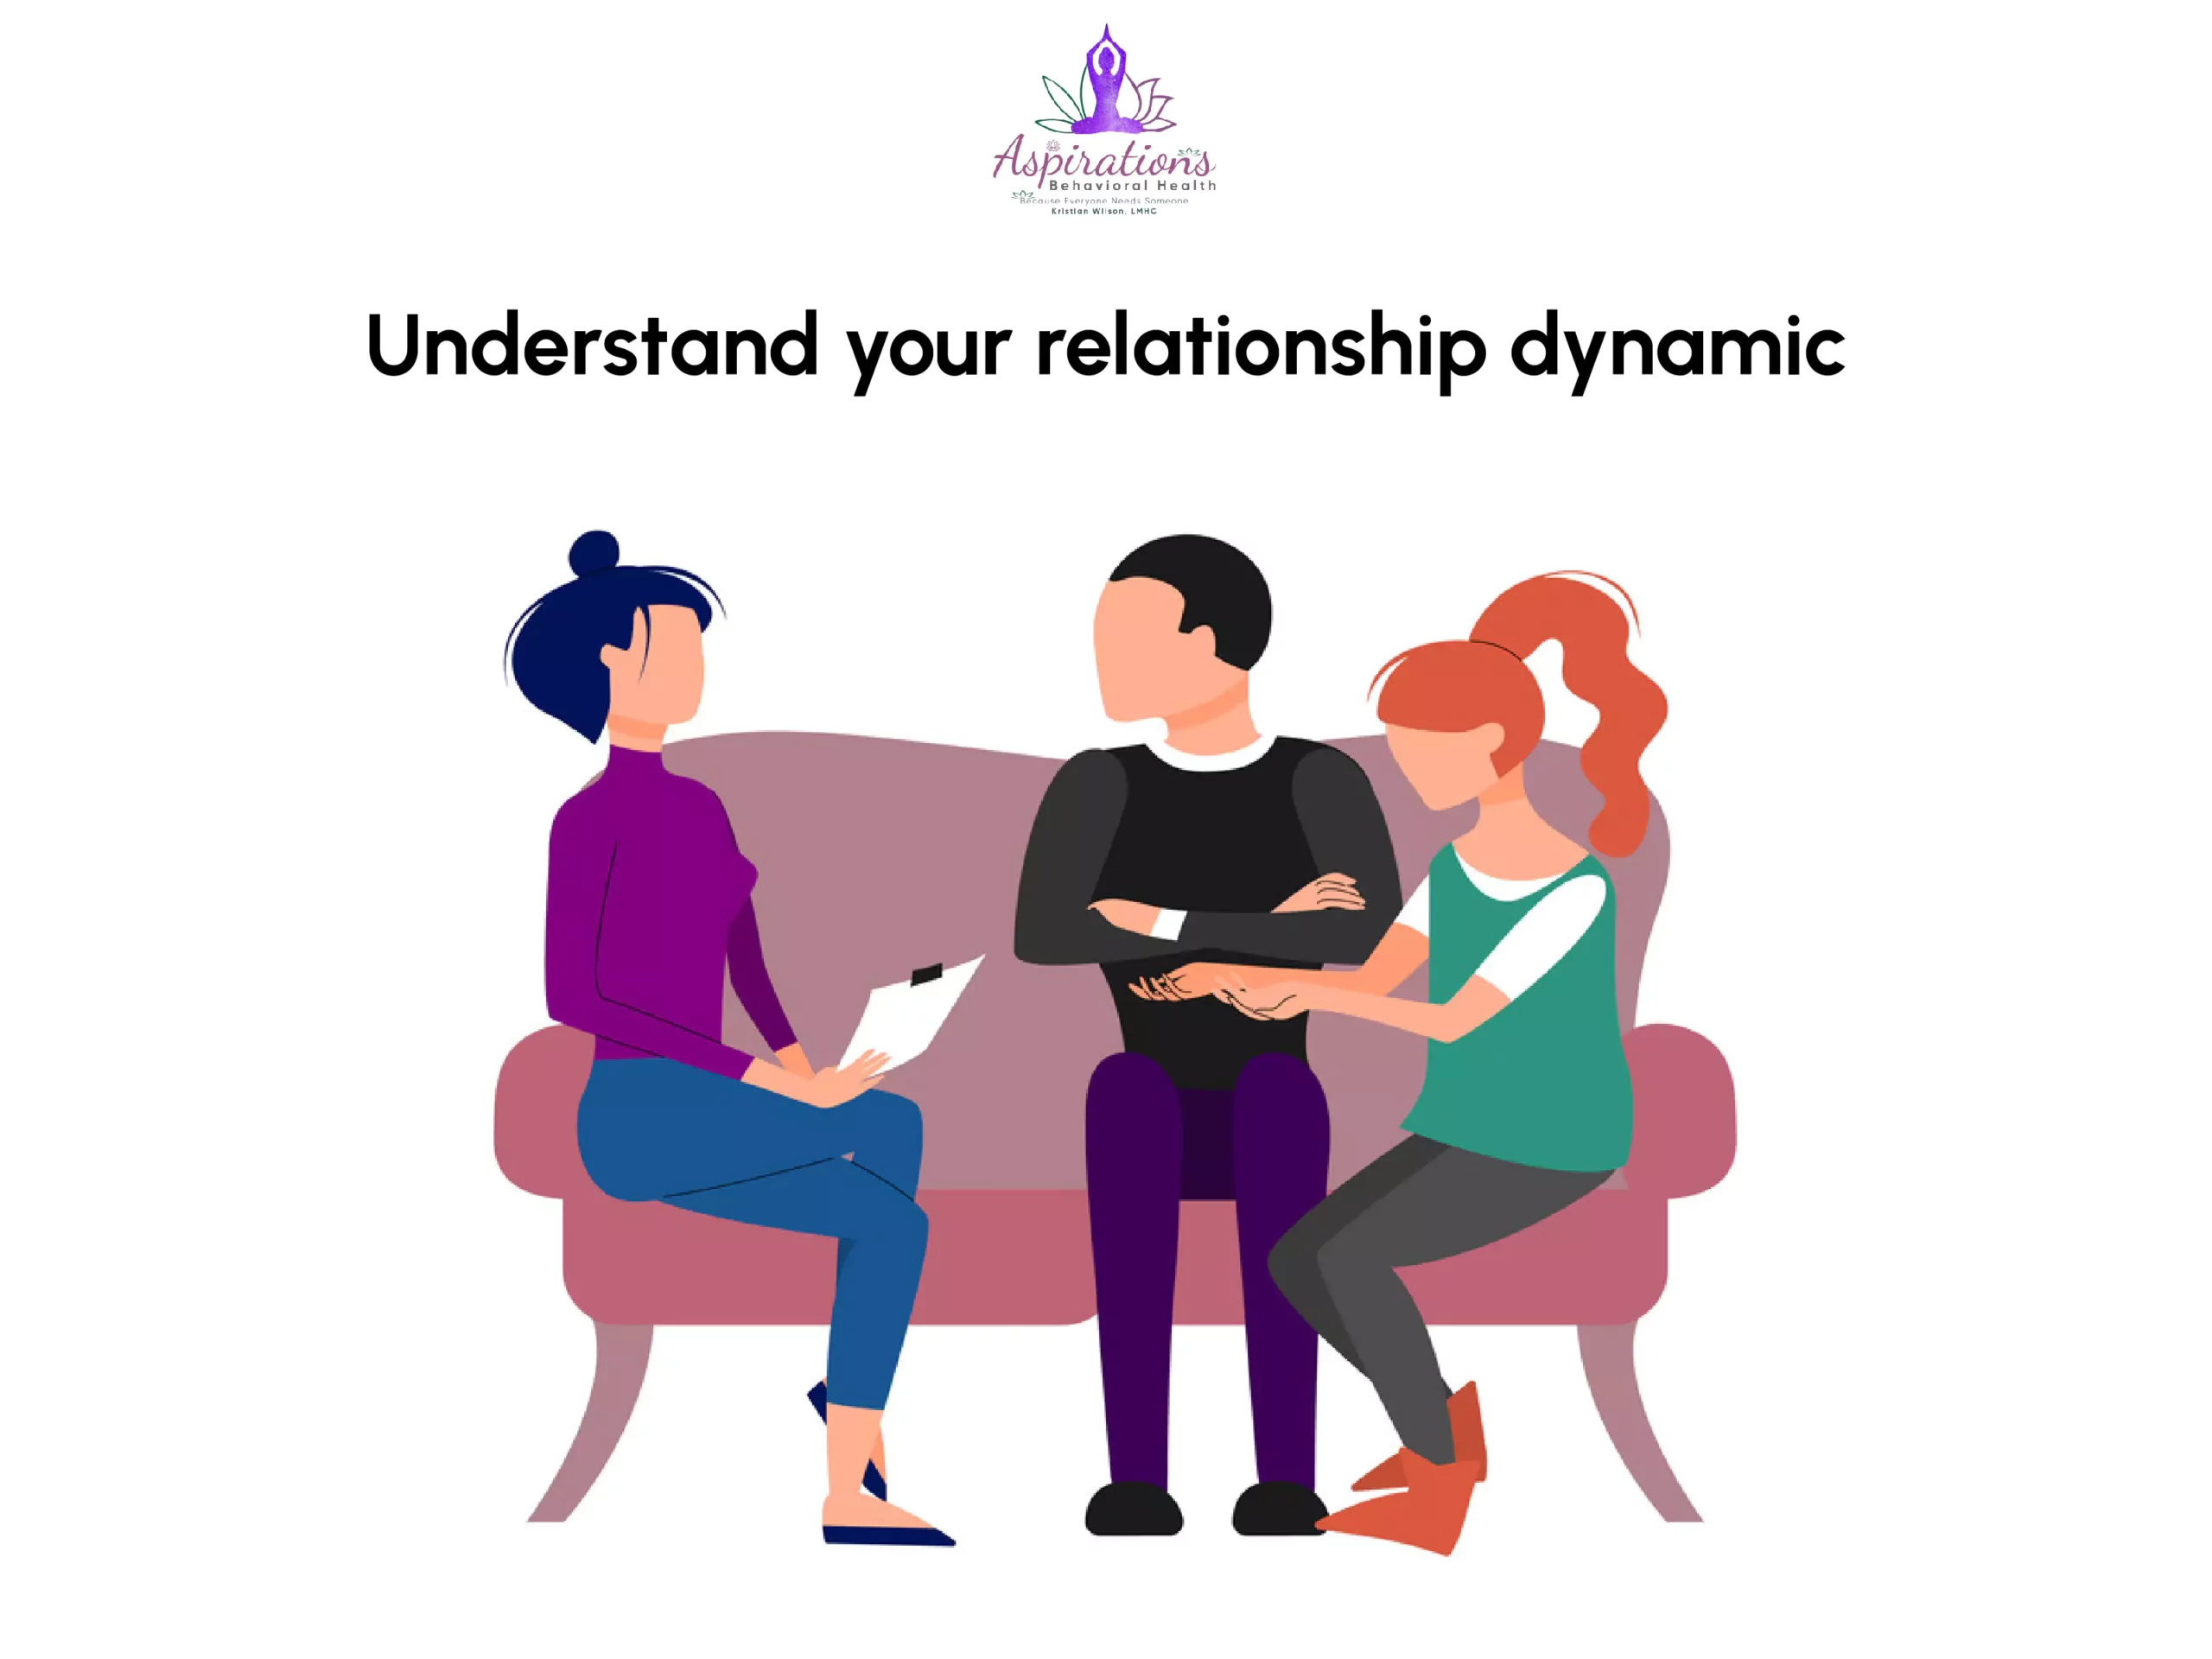 Understand your relationship dynamic